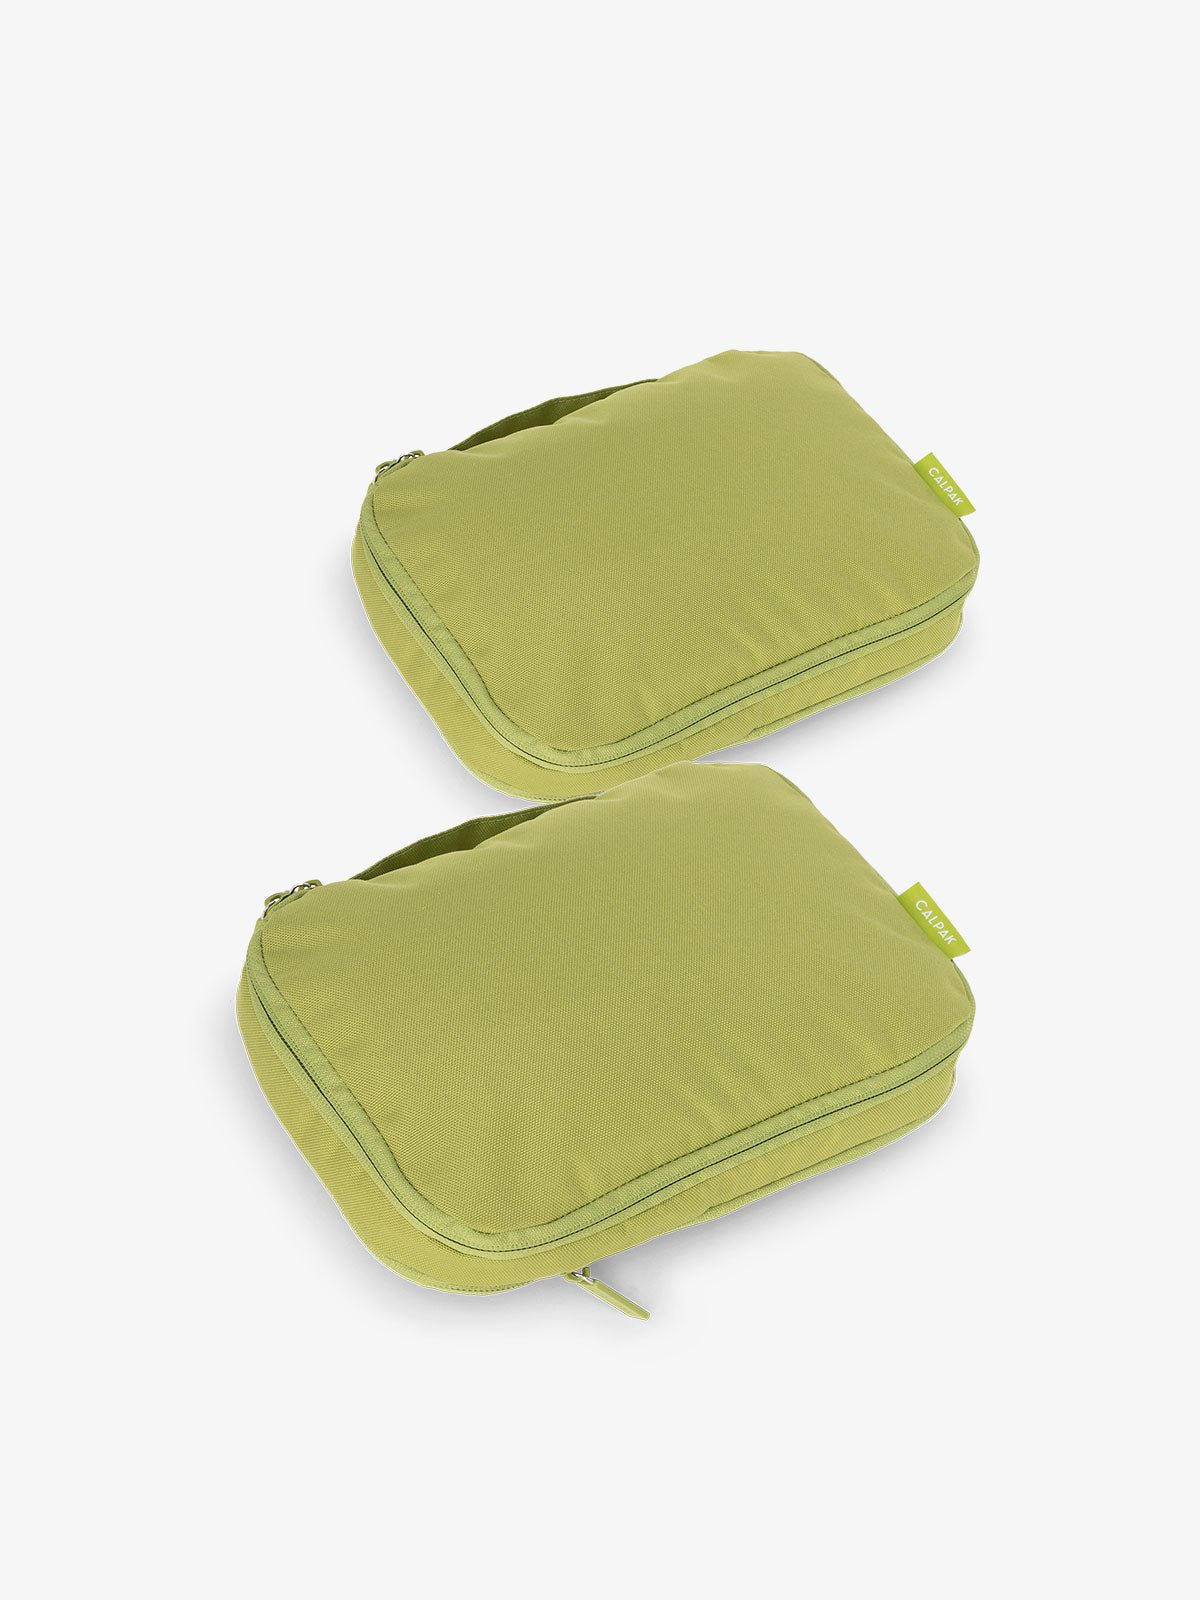 CALPAK small compression packing cubes in green